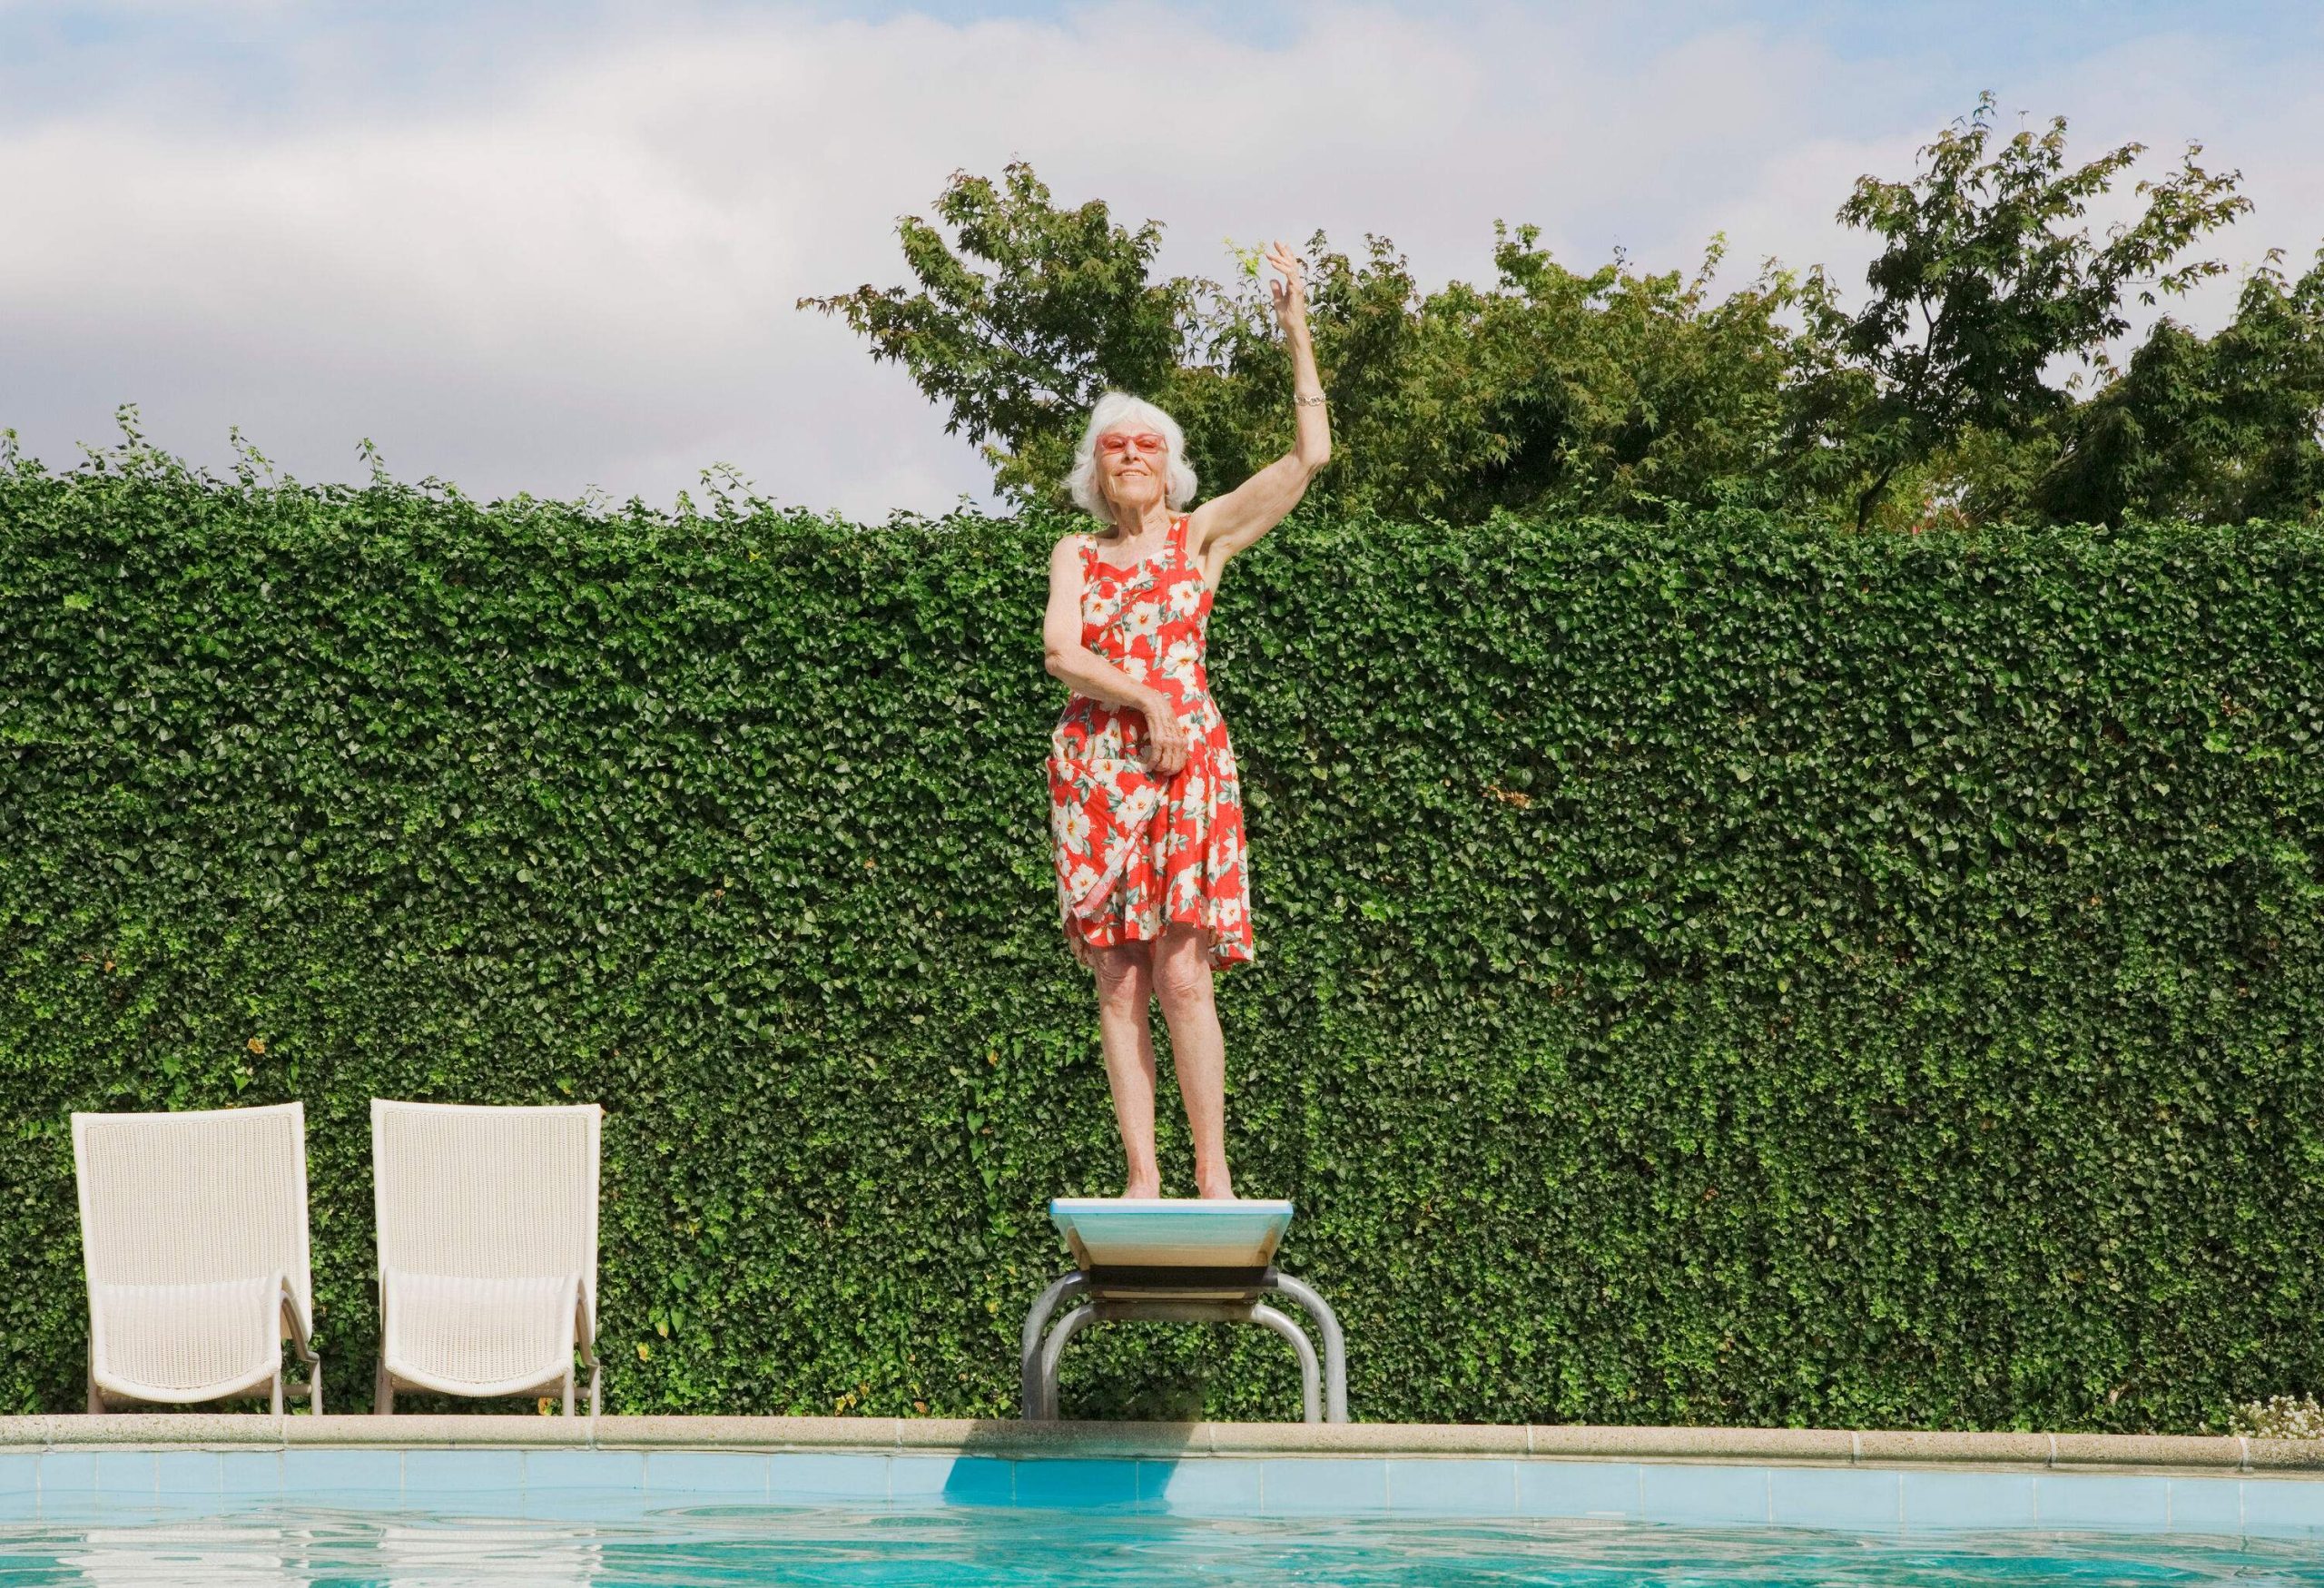 A senior woman in a floral dress is standing on a diving board above the pool against a green leaf wall.